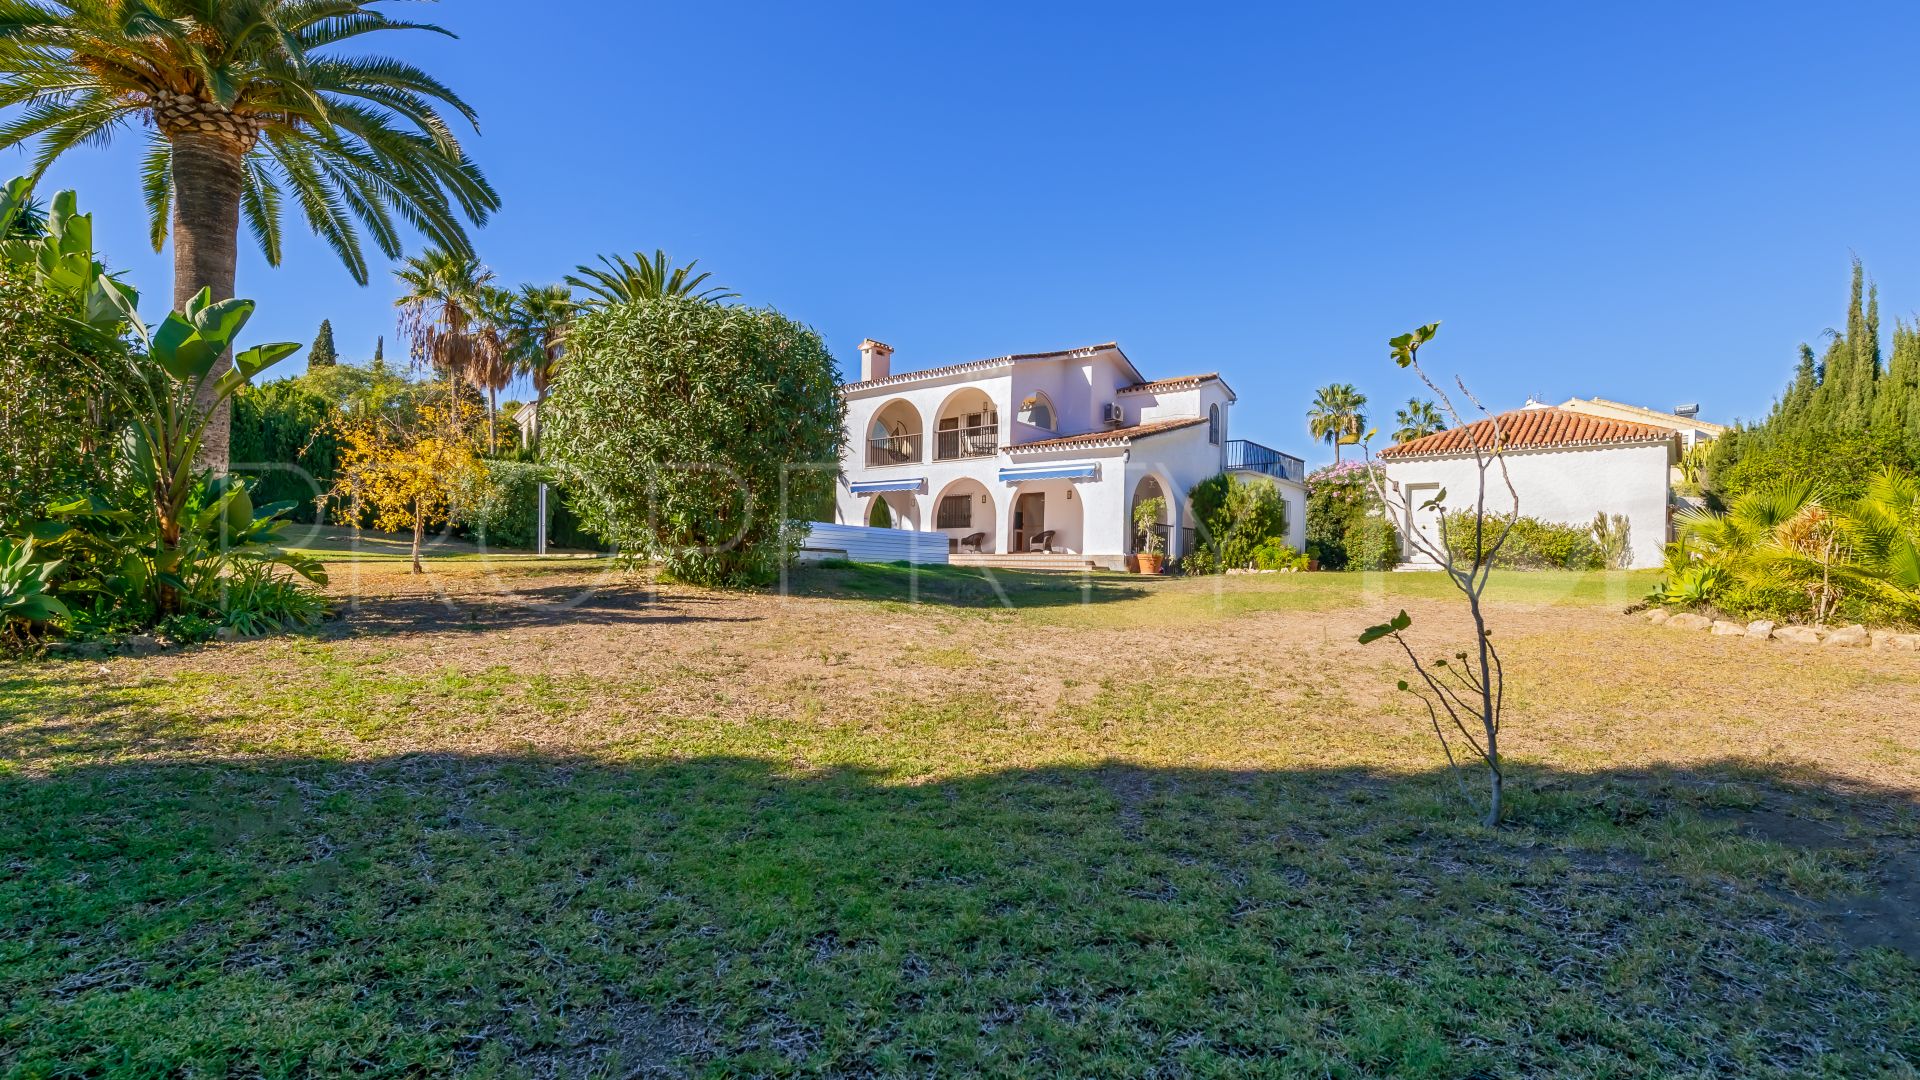 Villa for sale in Atalaya with 5 bedrooms